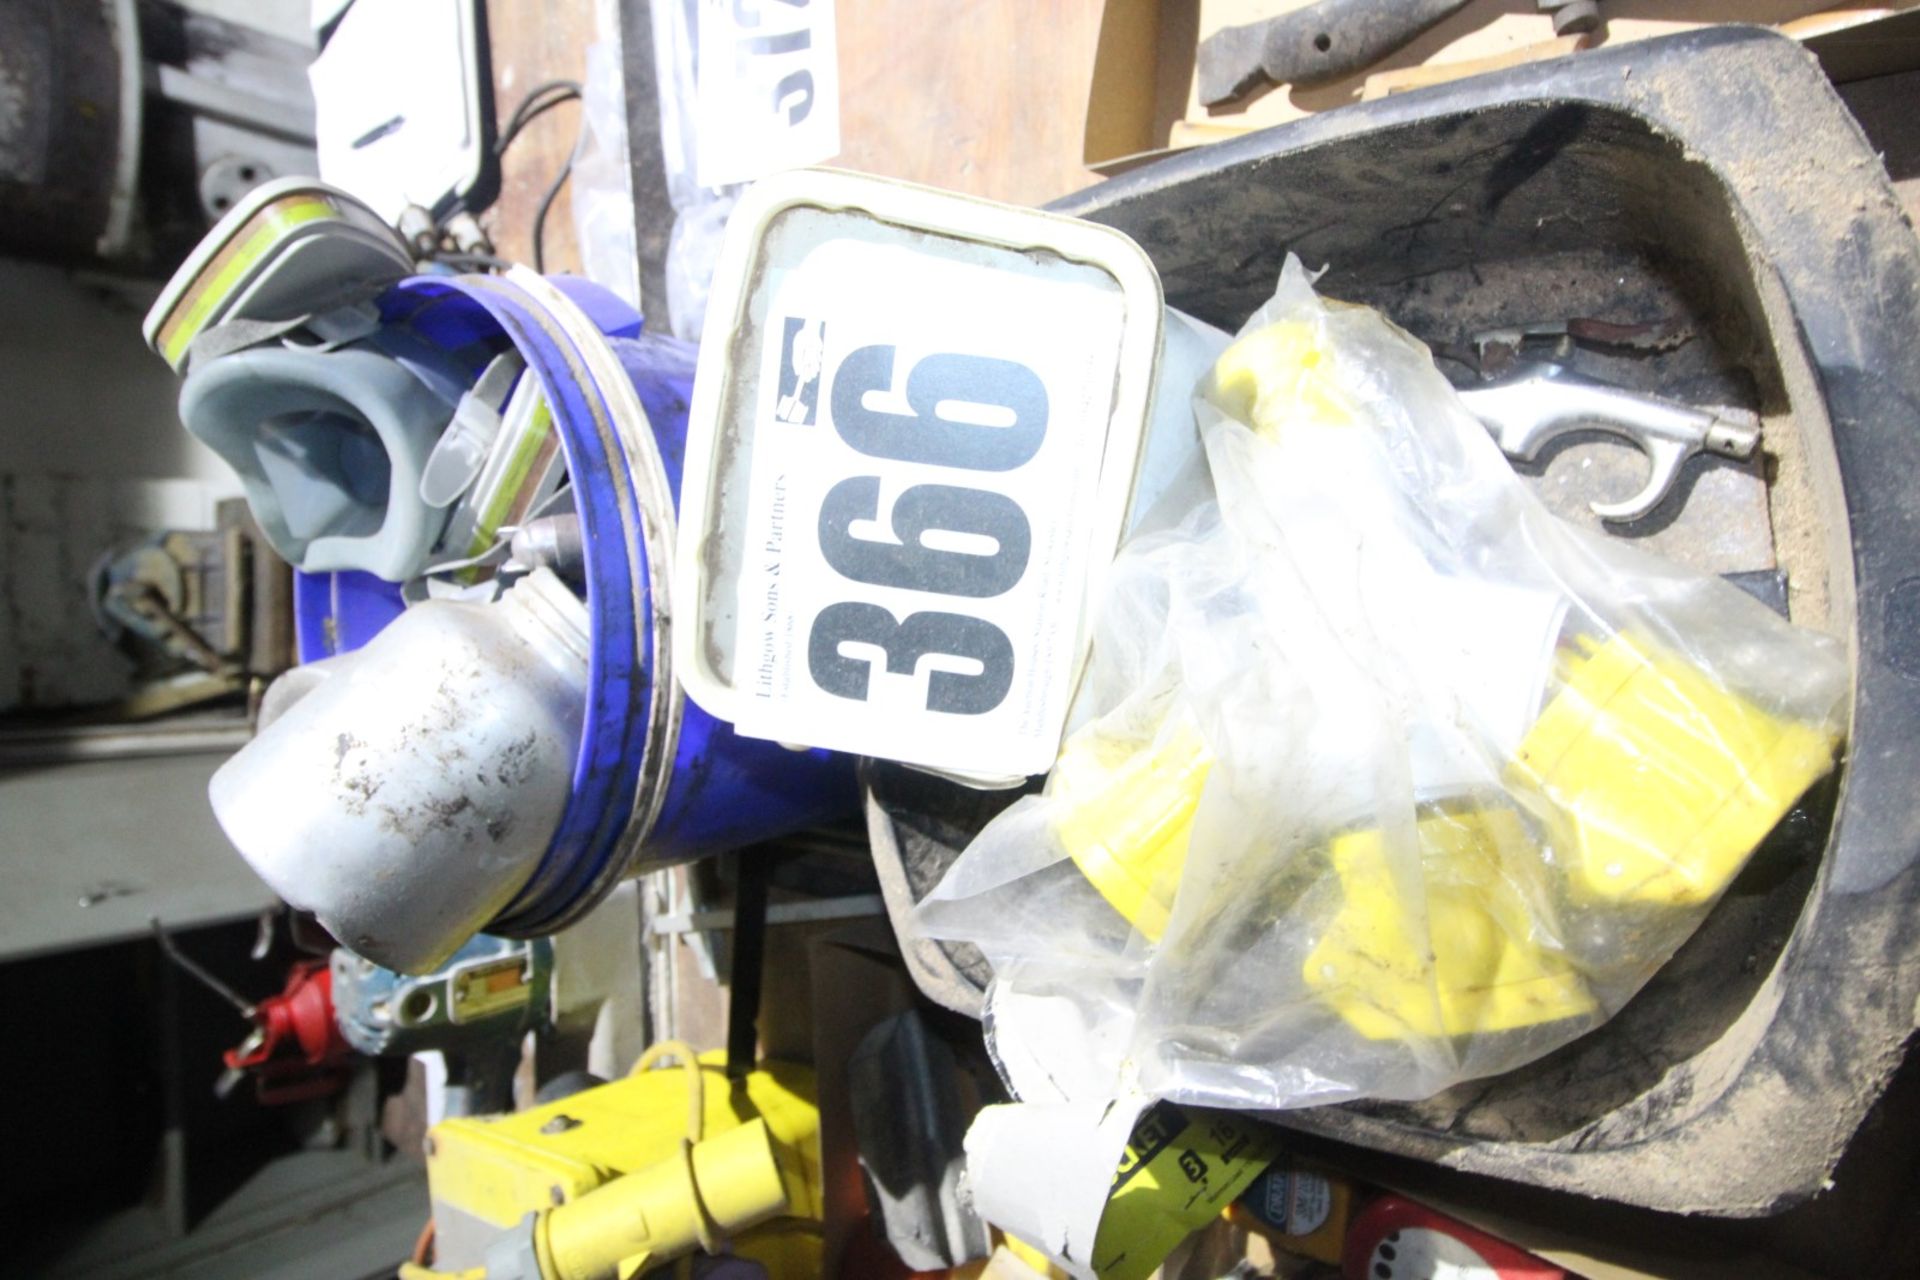 BLACK TUB AND CONTENTS INCLUDING OIL CAN, 110V SPLITTER, AND BLUE BUCKET AND CONTENTS OF SPRAY